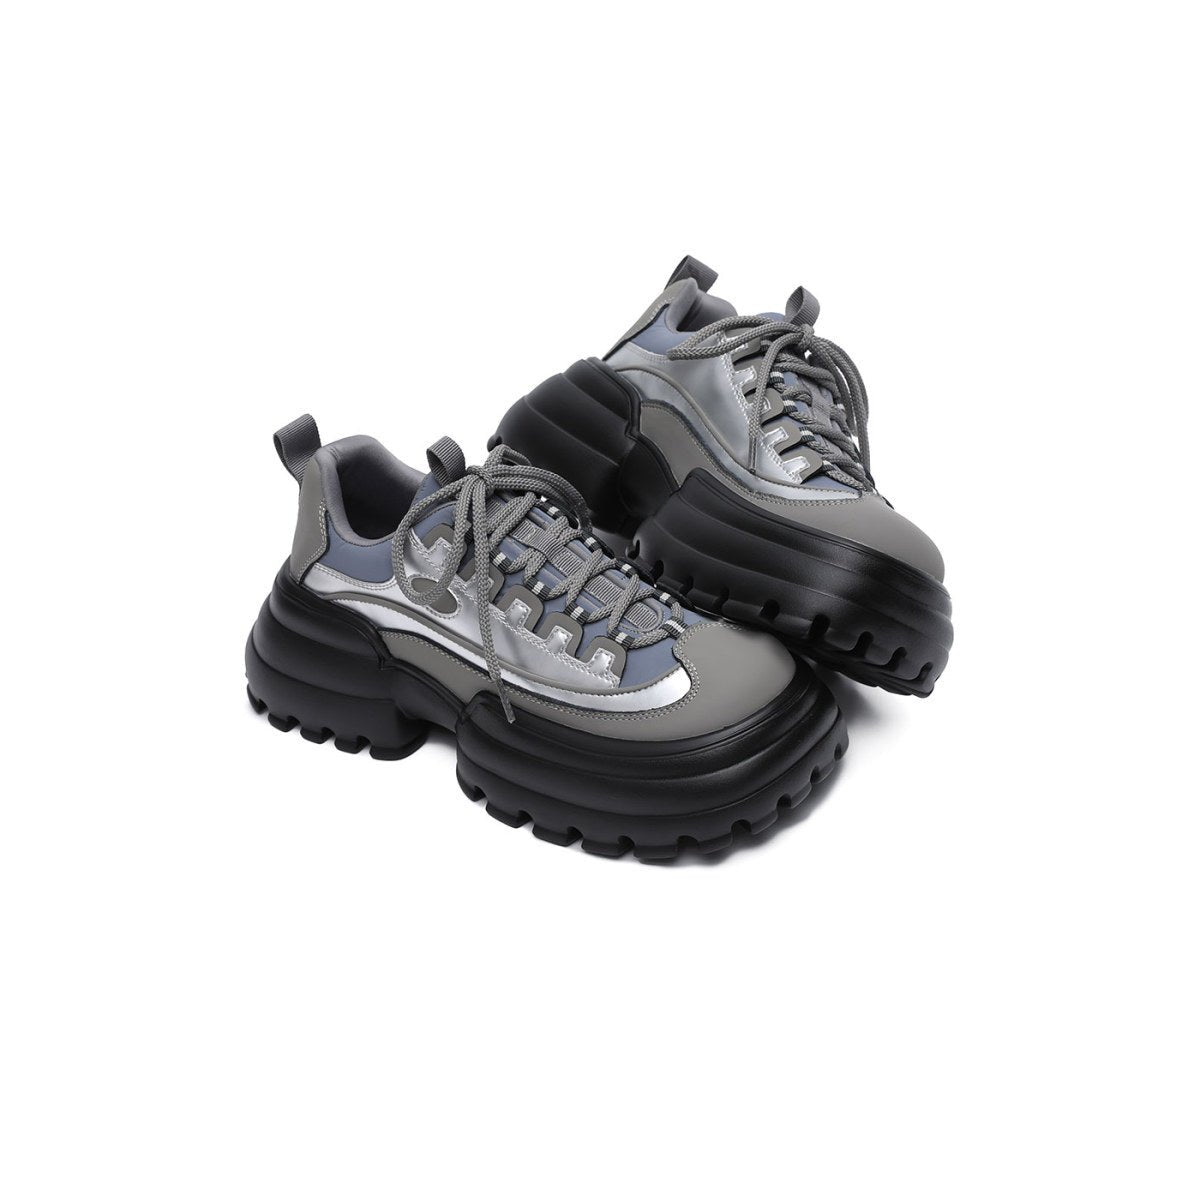 Smart Eyes Chunky Sole Charcoal Sneakers - 0cm